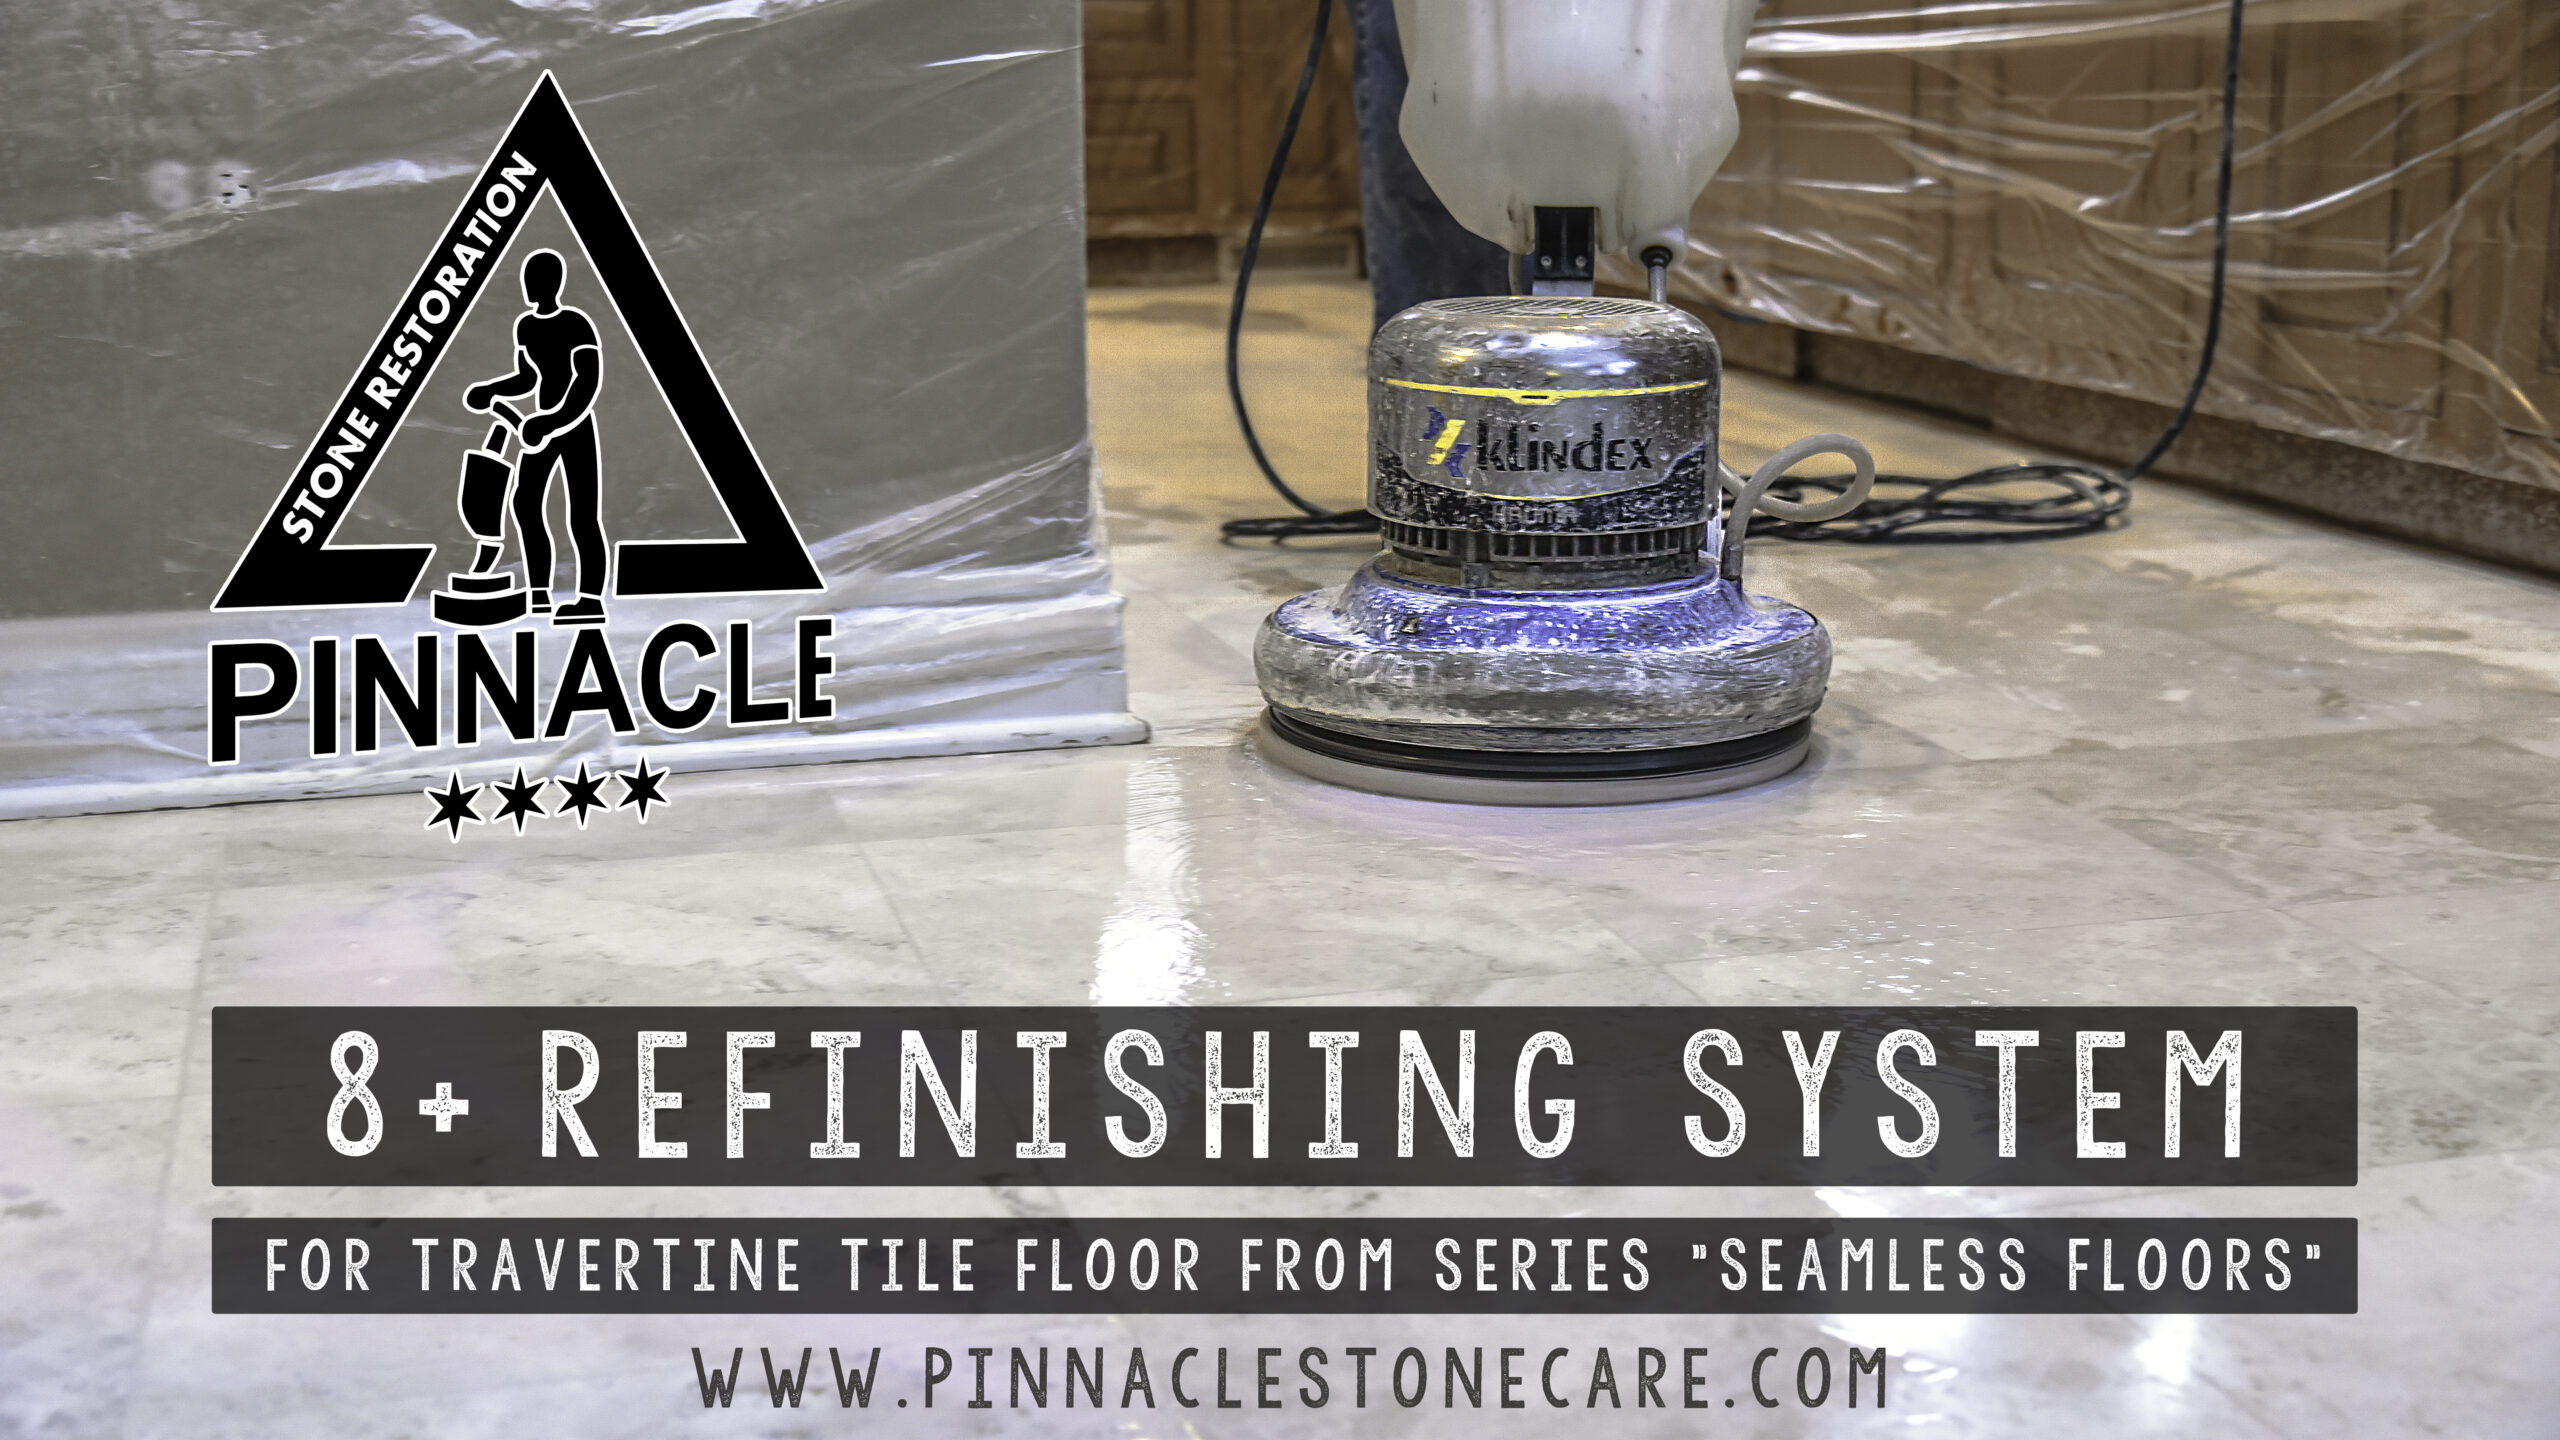 8+ Refinishing System of travertine tile floor from series “Seamless Floors” (lippage/seam leveling)